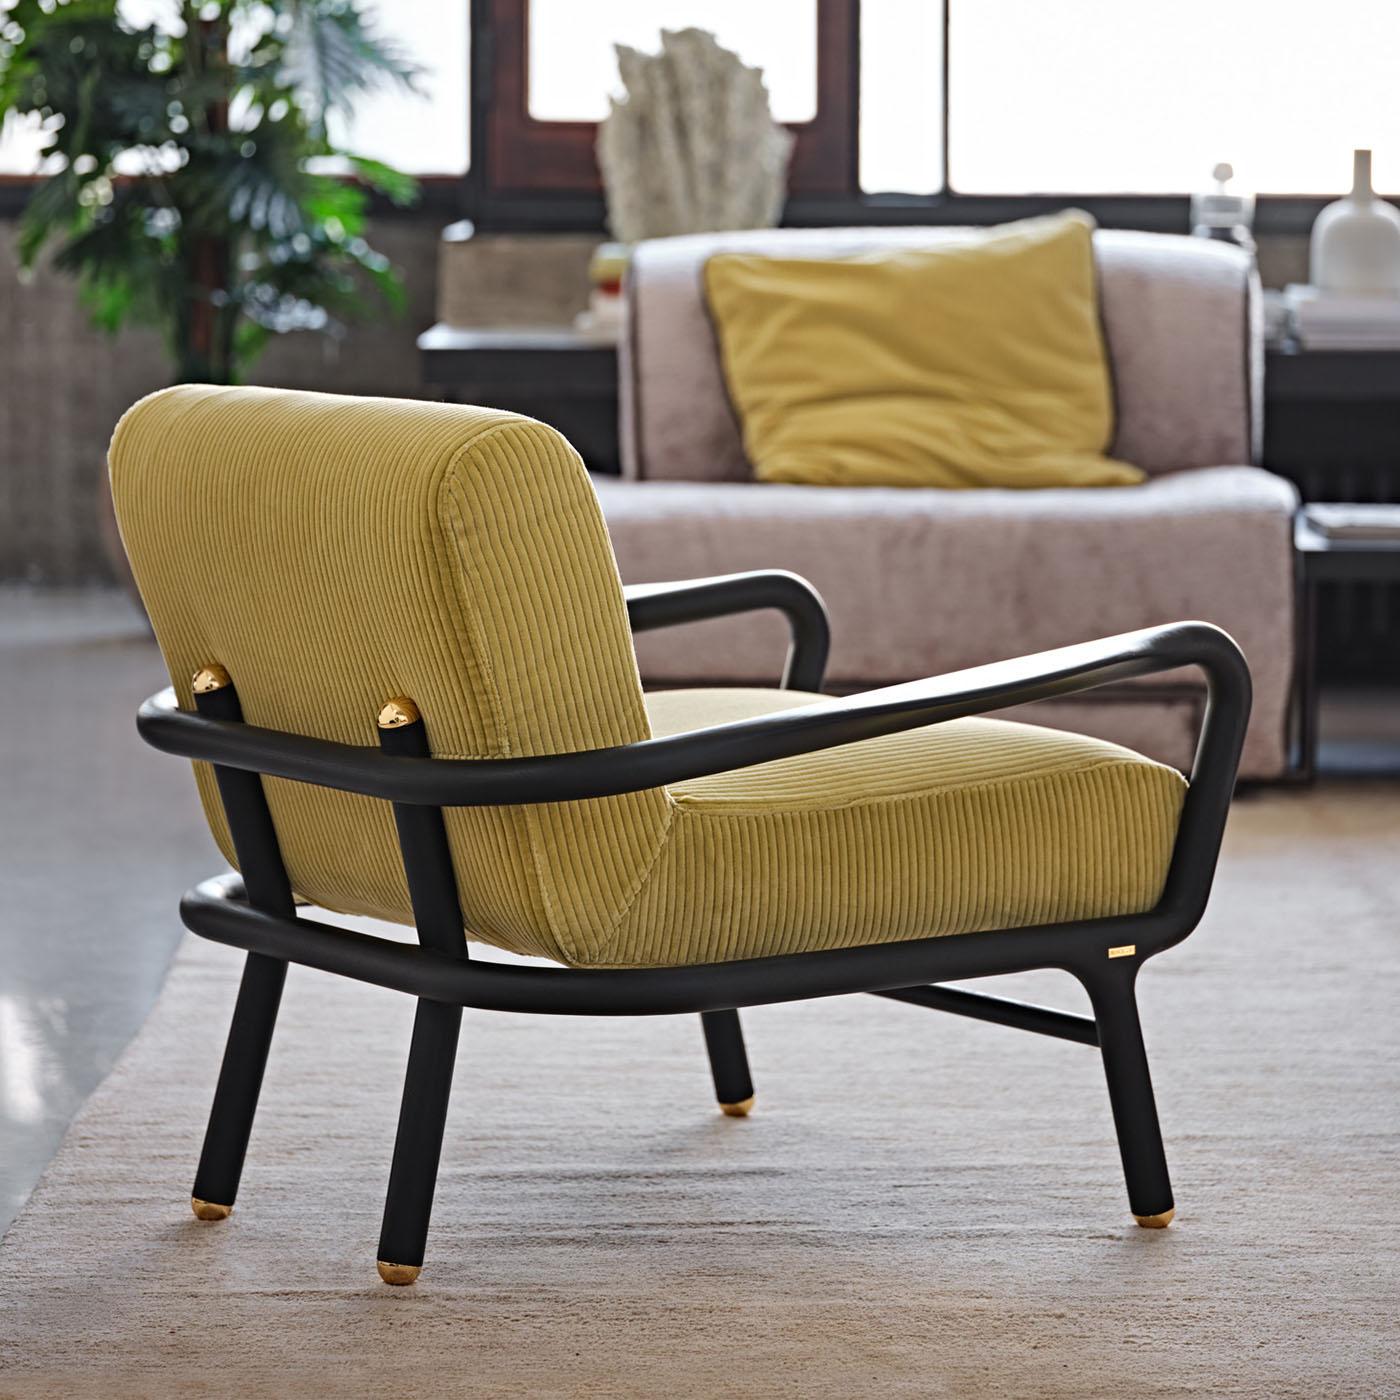 Clean and dynamic lines outline the modern silhouette of this armchair, whose seat's indulging silhouette makes it perfect for resting in the company of a good book. Glossy golden details accent the tips of its cylindrical solid ash frame, stained